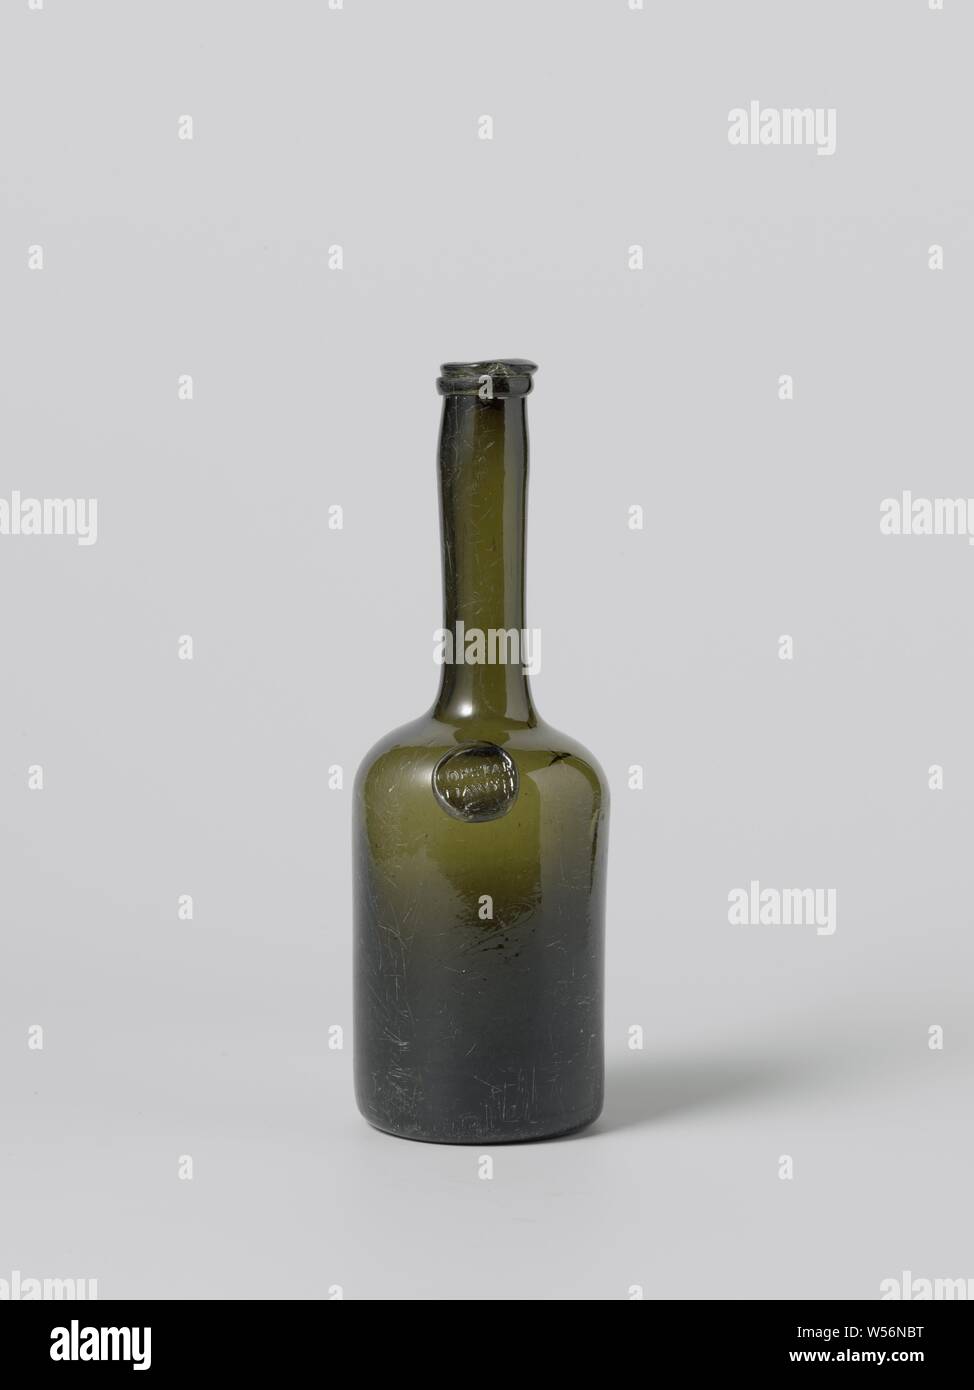 Cylindrical bottle for 'Constantia wine', Green glass bottle with fairly wide and short belly and long neck. The seal is located on the bulging of the abdomen just below the start of the neck. CONSTAN / TIA WYN is shown in a curve. Constantia wine was and is a famous wine from the Constantia country estate (later Groot Constantia) in Cape Town, South Africa. The bottle was dredged on the coast of Ghana. The mouthpiece of the bottle is uneven, Cape of Good Hope, Cape Town, Groot Constantia, Dutch East India Company, anonymous, Noordwest-Europa, c. 1790 - c. 1800, glass, glassblowing, h 23.3 cm Stock Photo